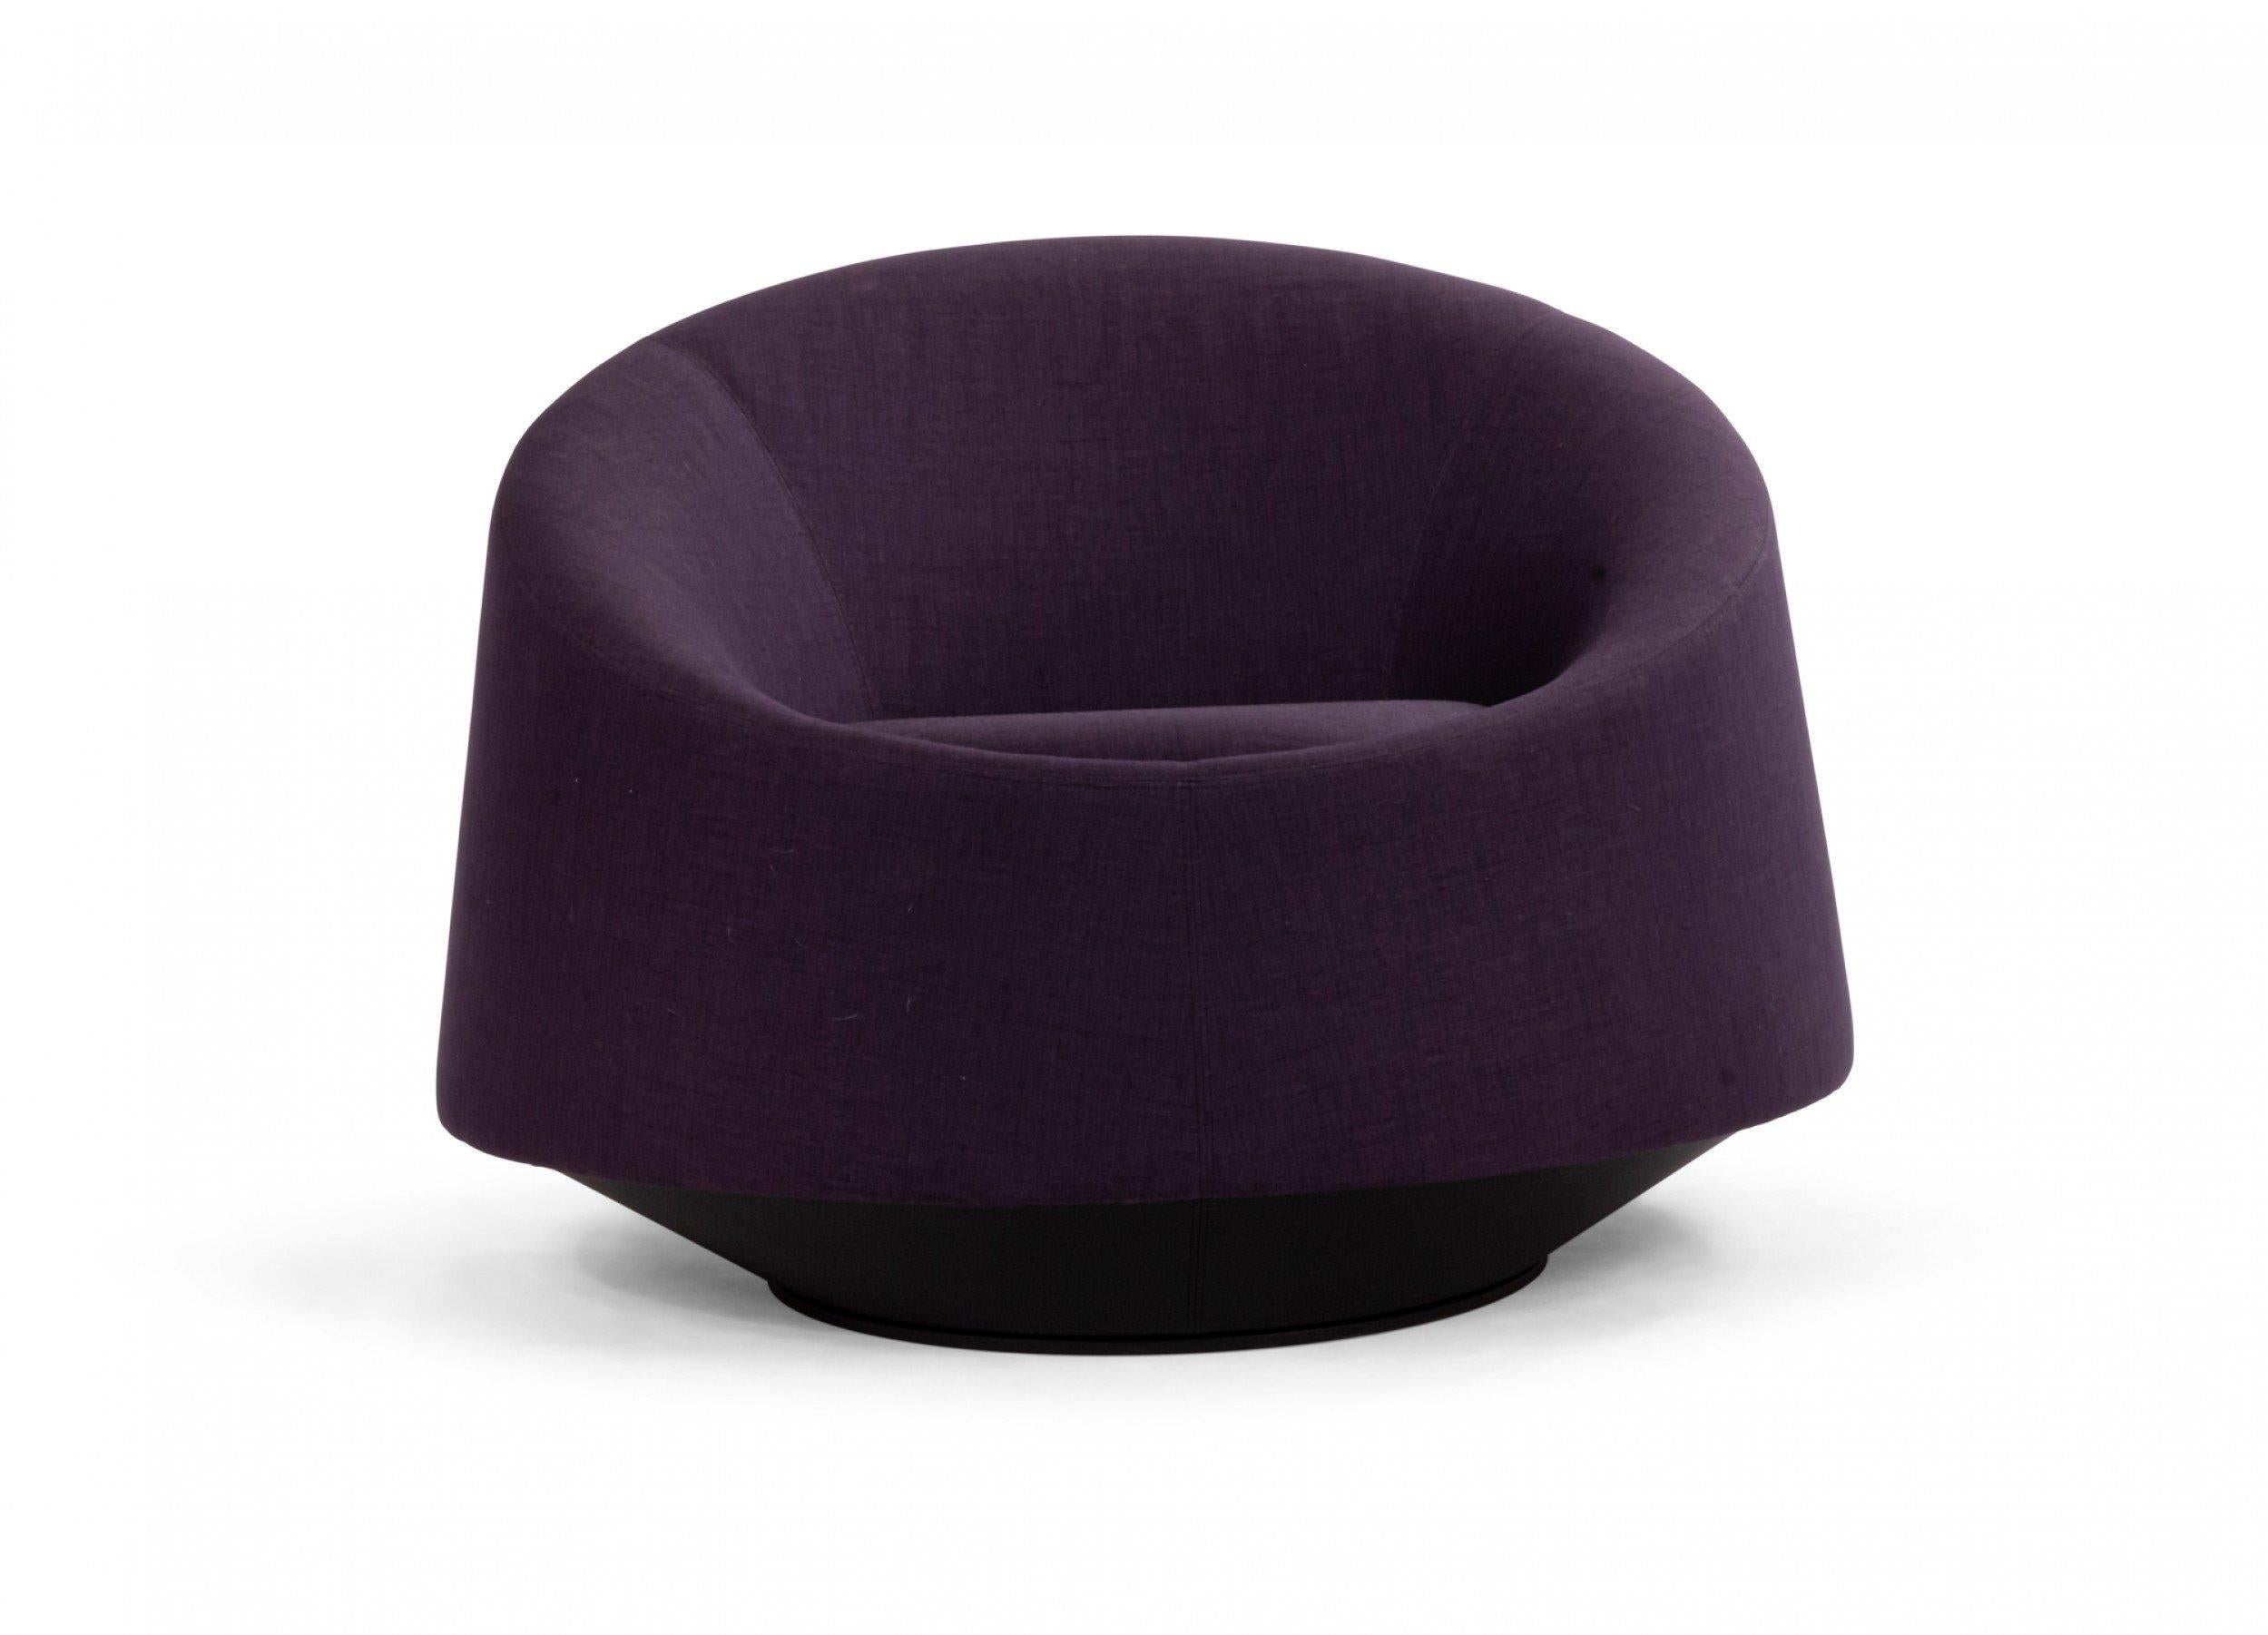 Contemporary swiveling circular shaped arm chair with deep purple fabric upholstery.